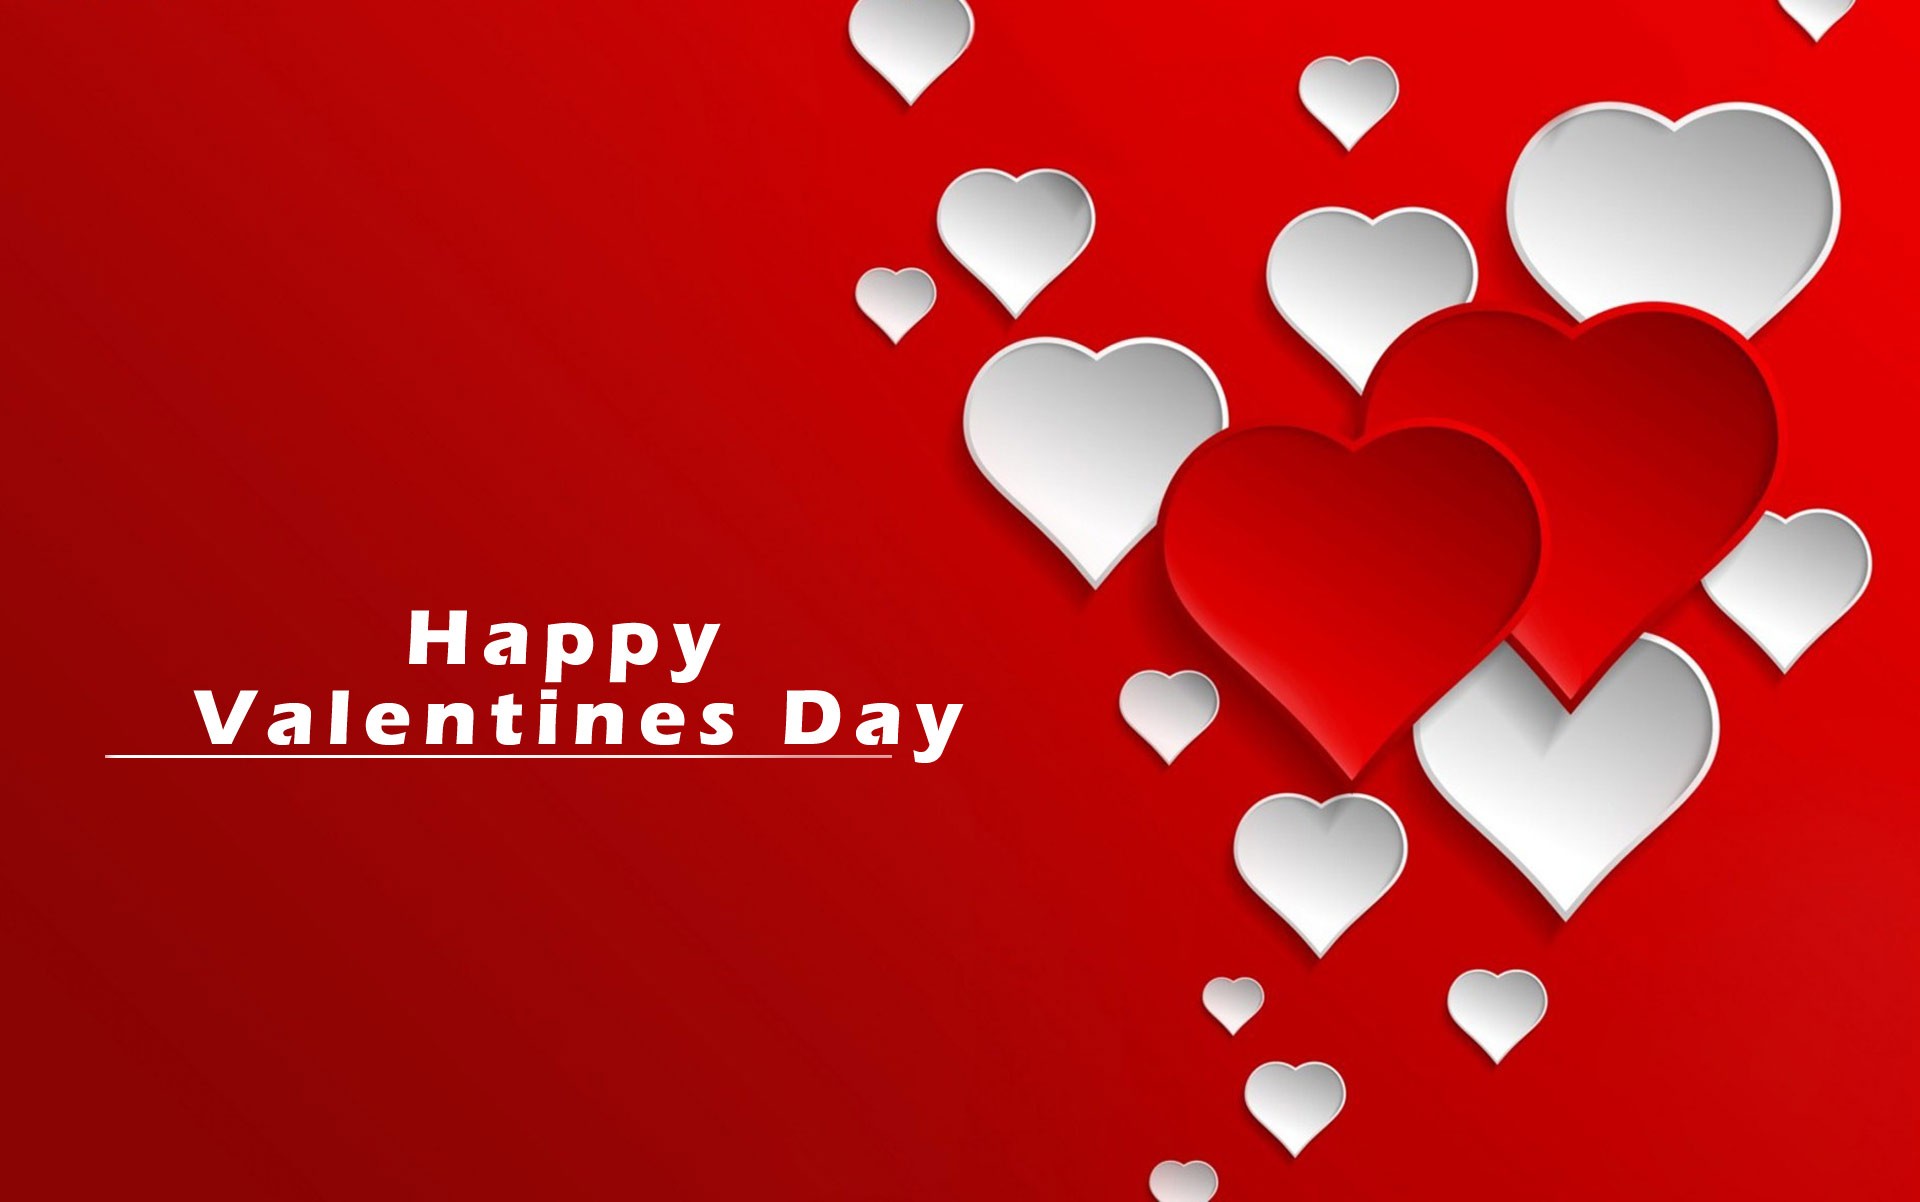 Happy Valentine’s Day 3d hearts wallpapper